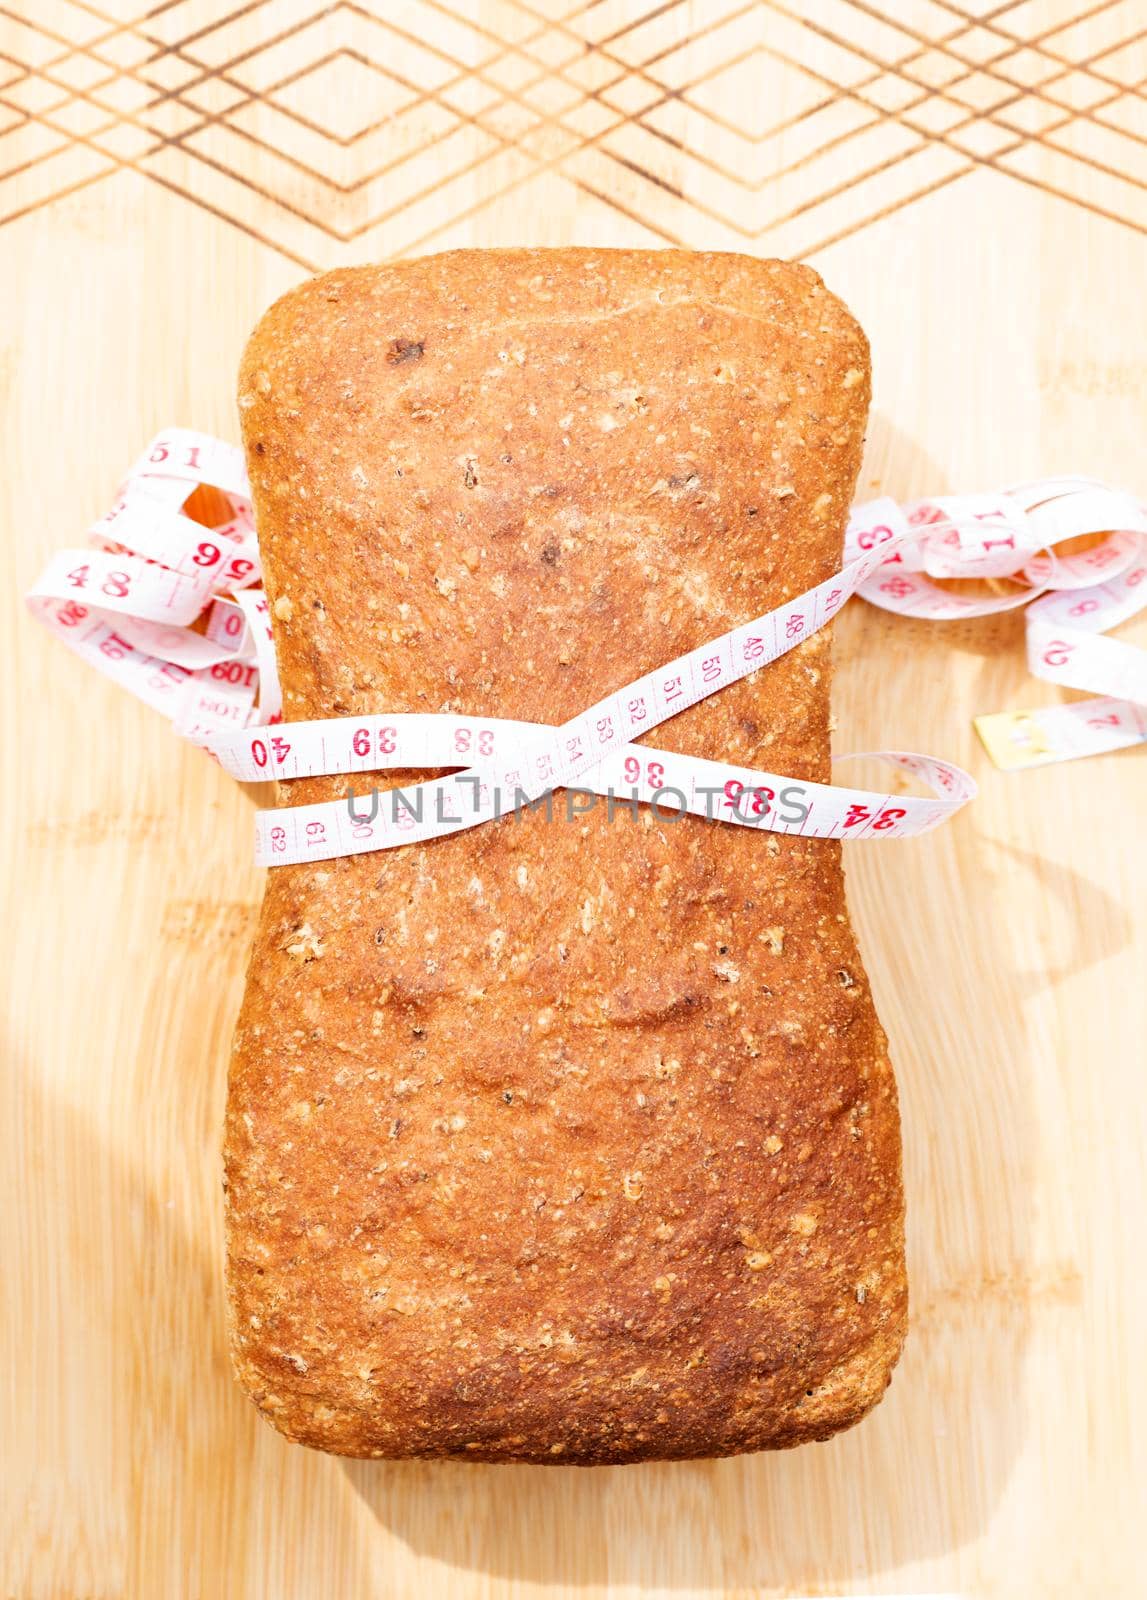 whole grain bread wrapped in a measuring tape on a board by Iryna_Melnyk